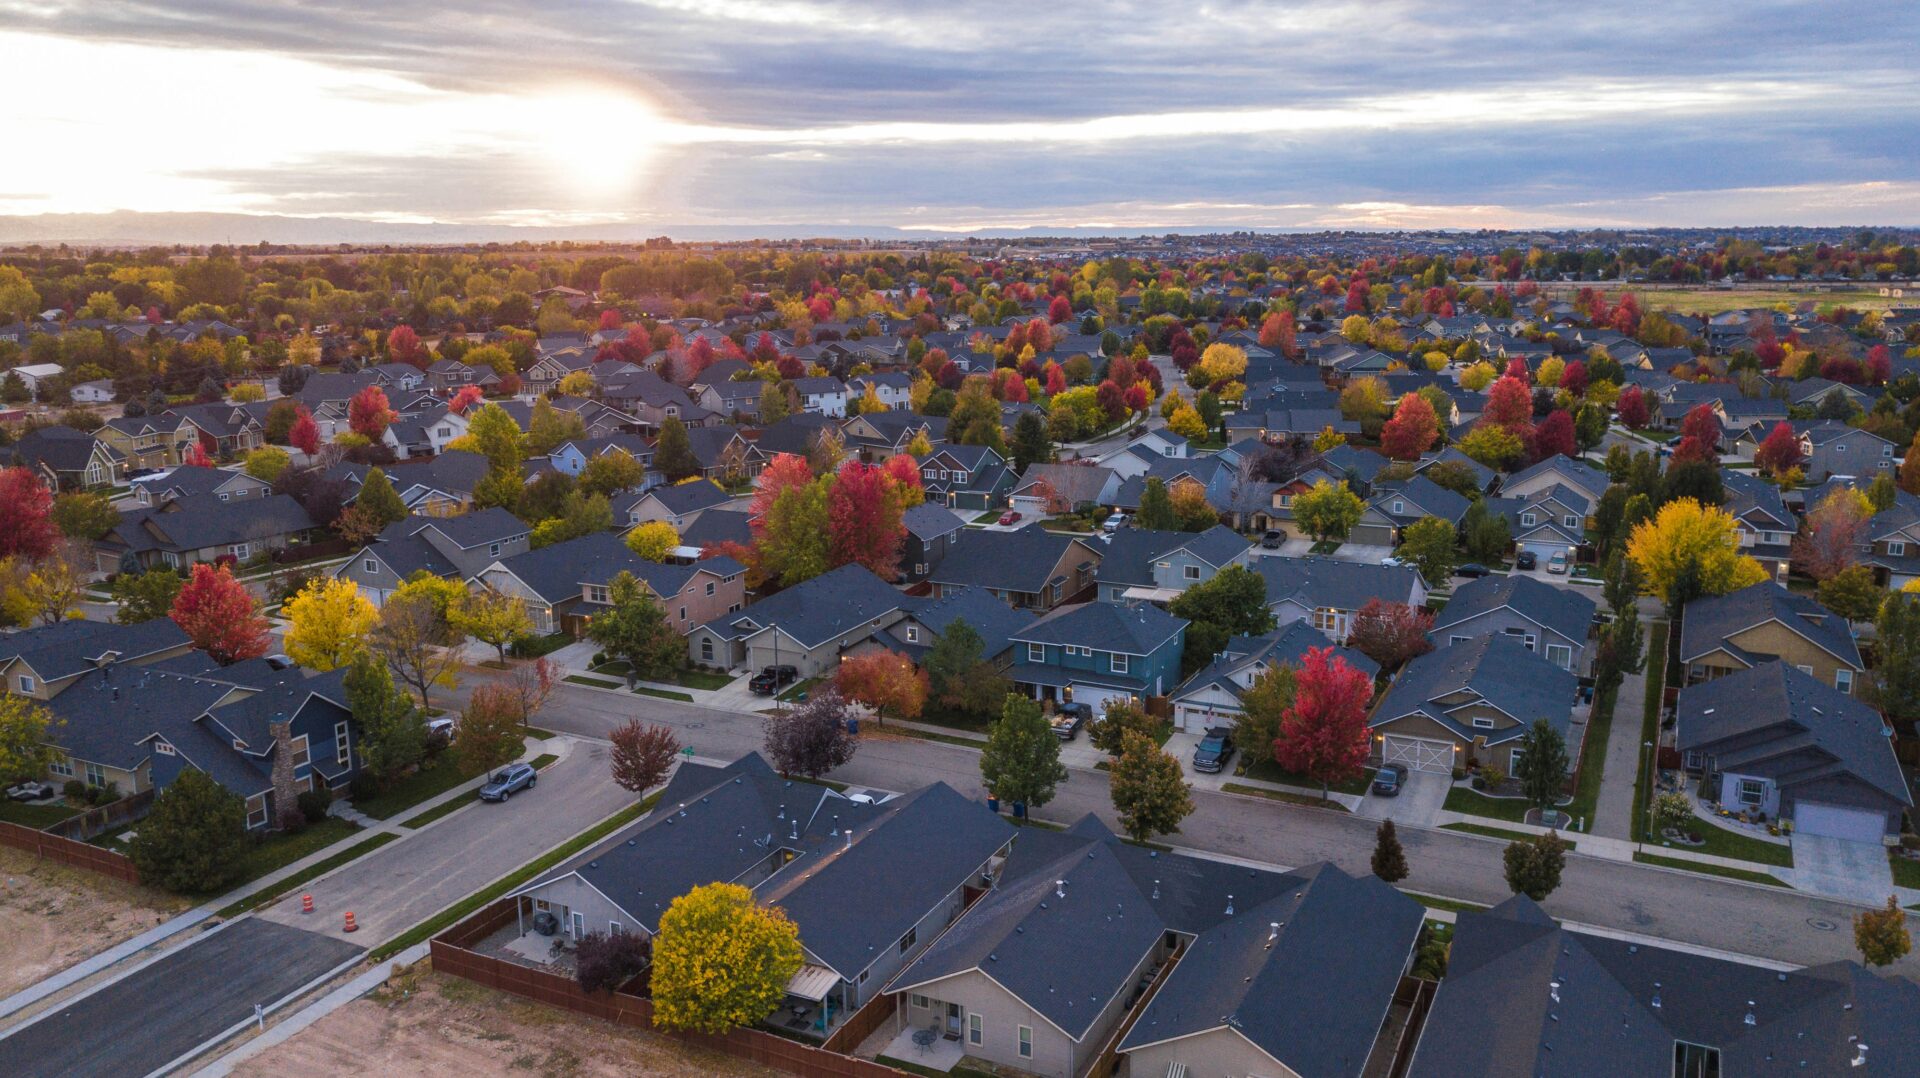 A view of houses with autumn trees in the background.